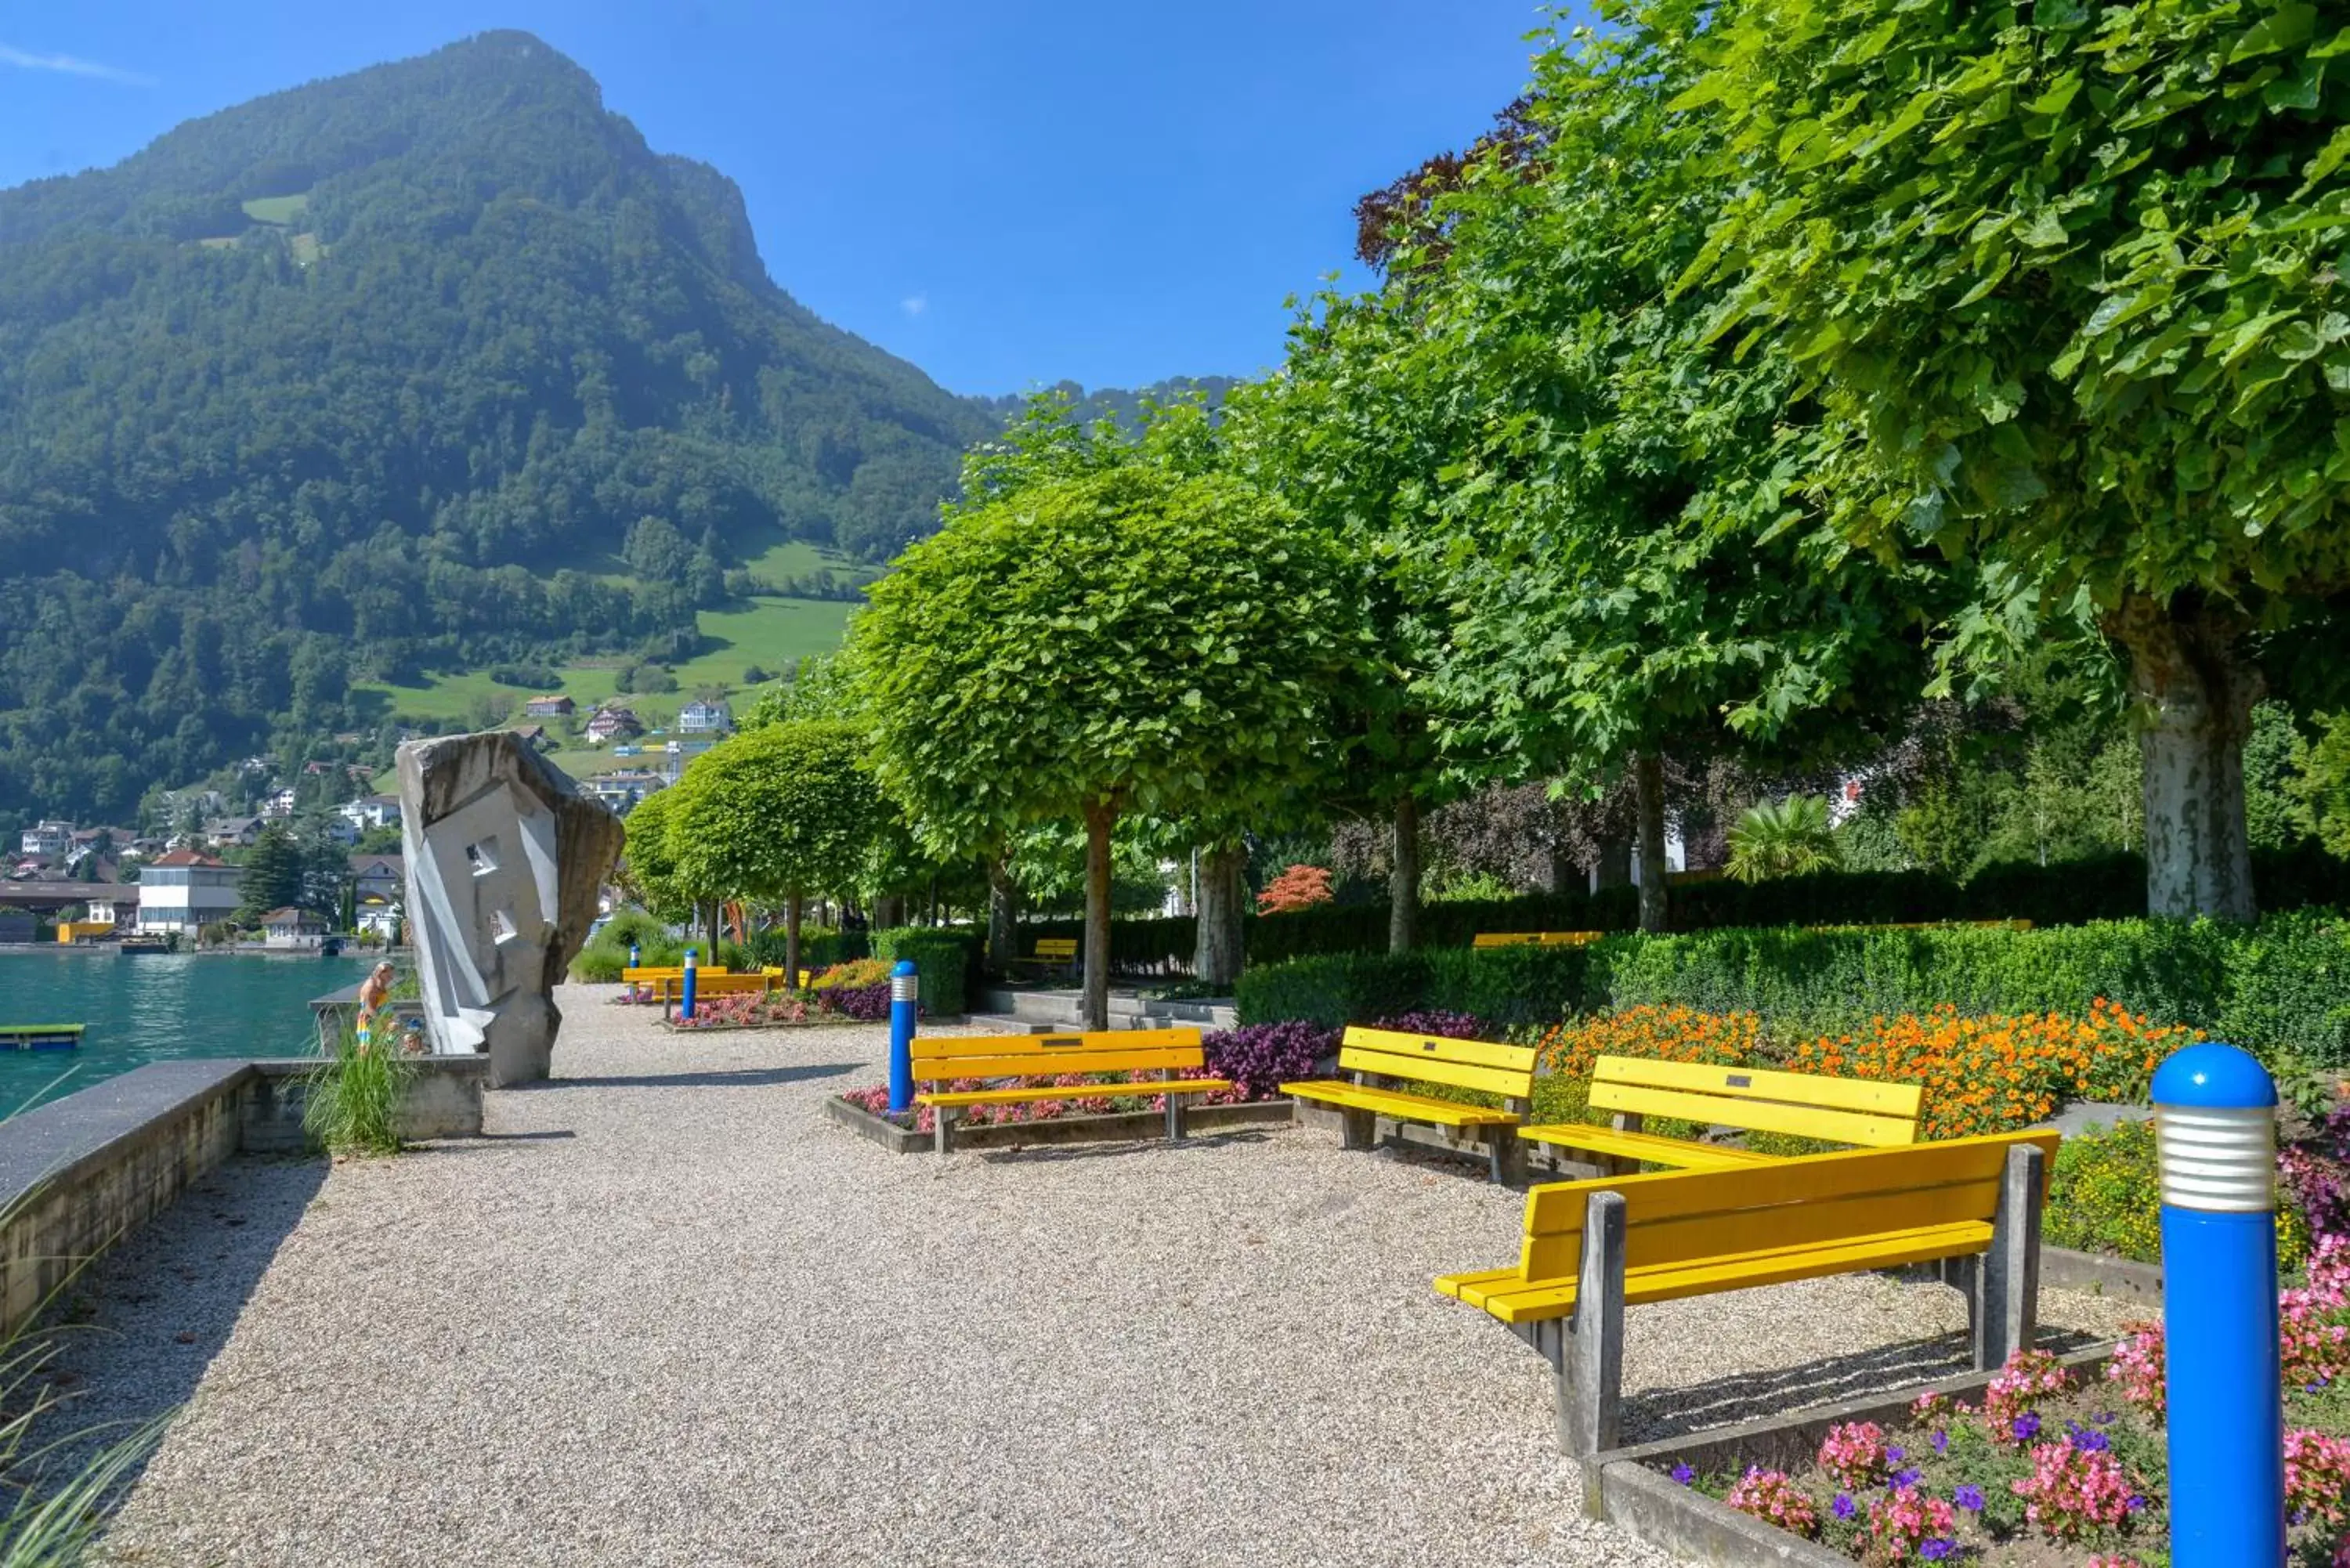 Nearby landmark in Seehotel Riviera at Lake Lucerne